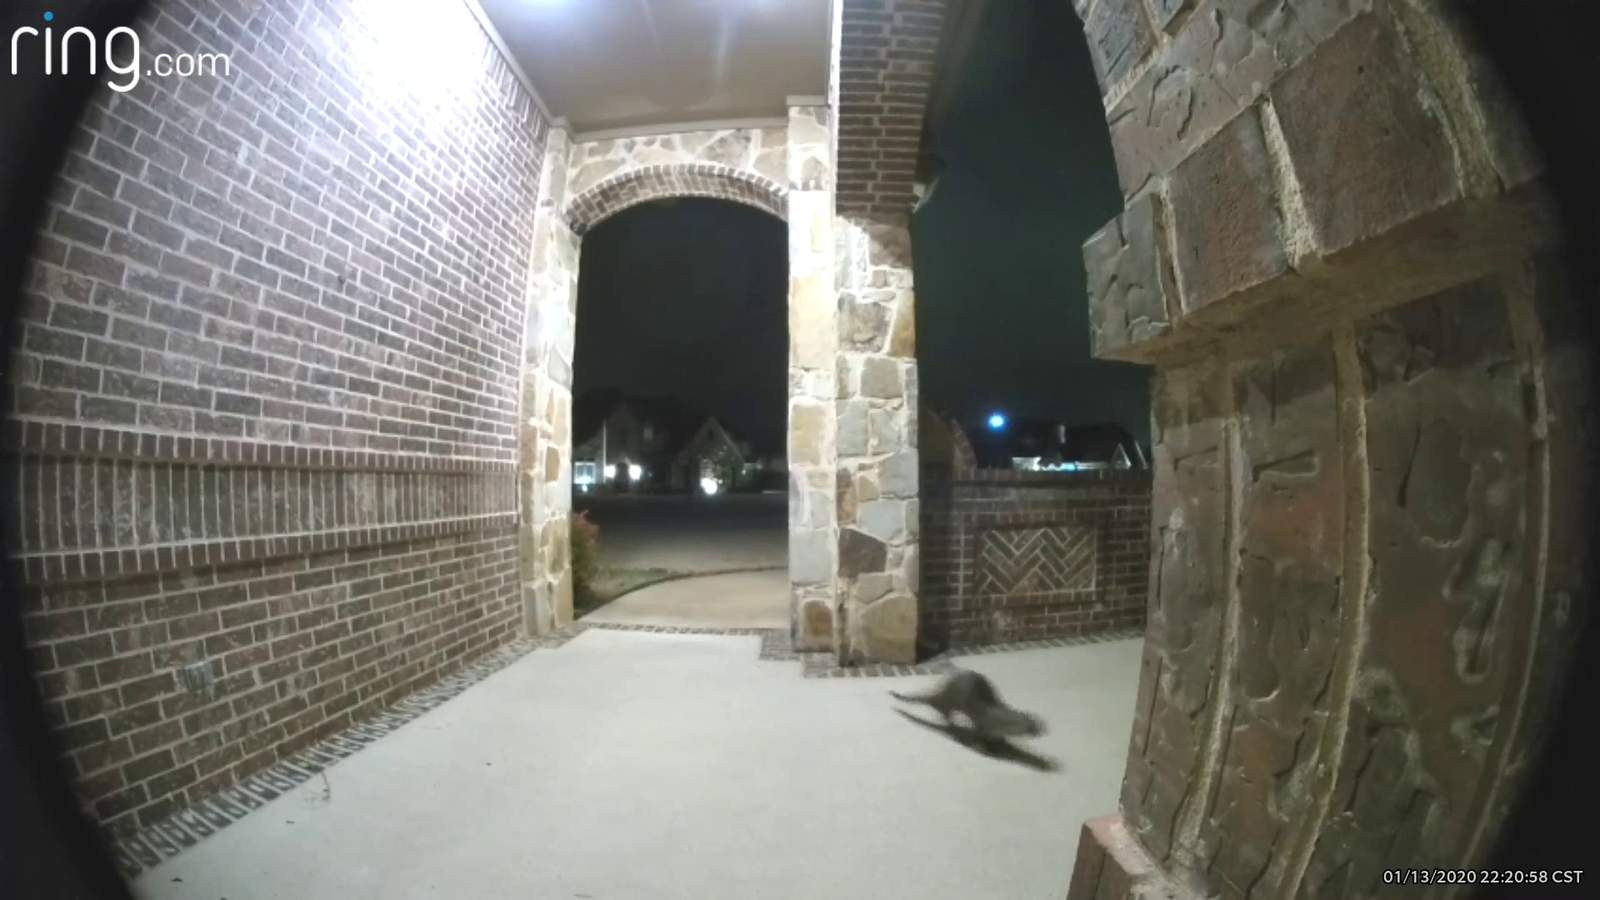 Have you seen this otter? It may still be wandering around north Texas